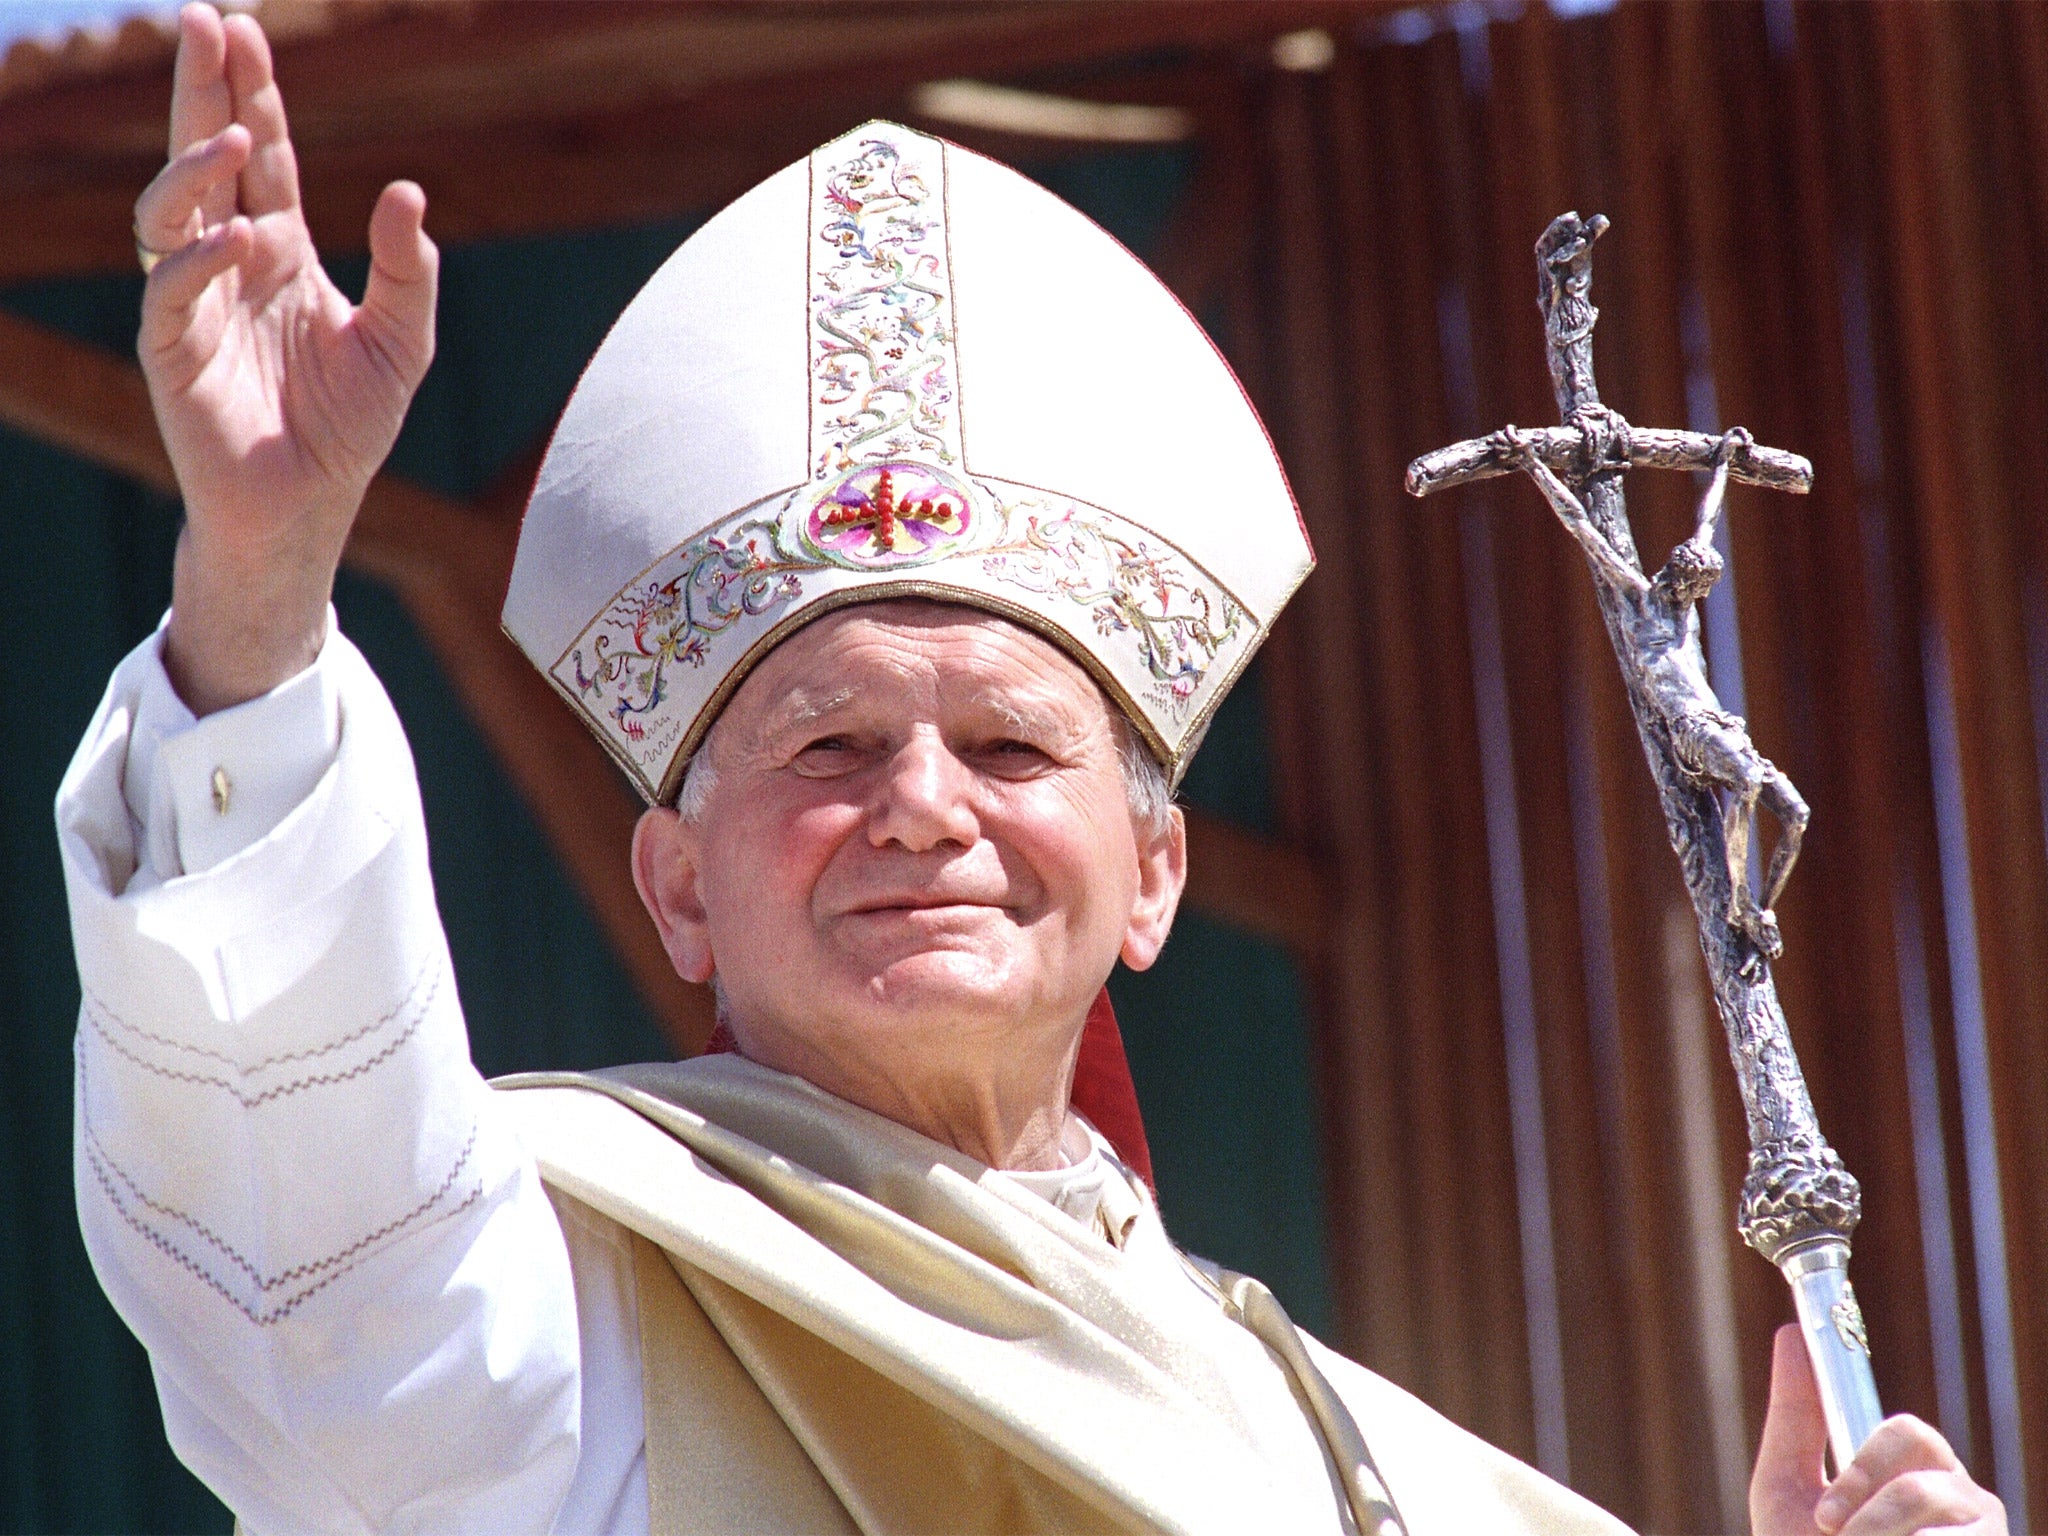 John Paul II’s canonisation is likely to be on 20 October